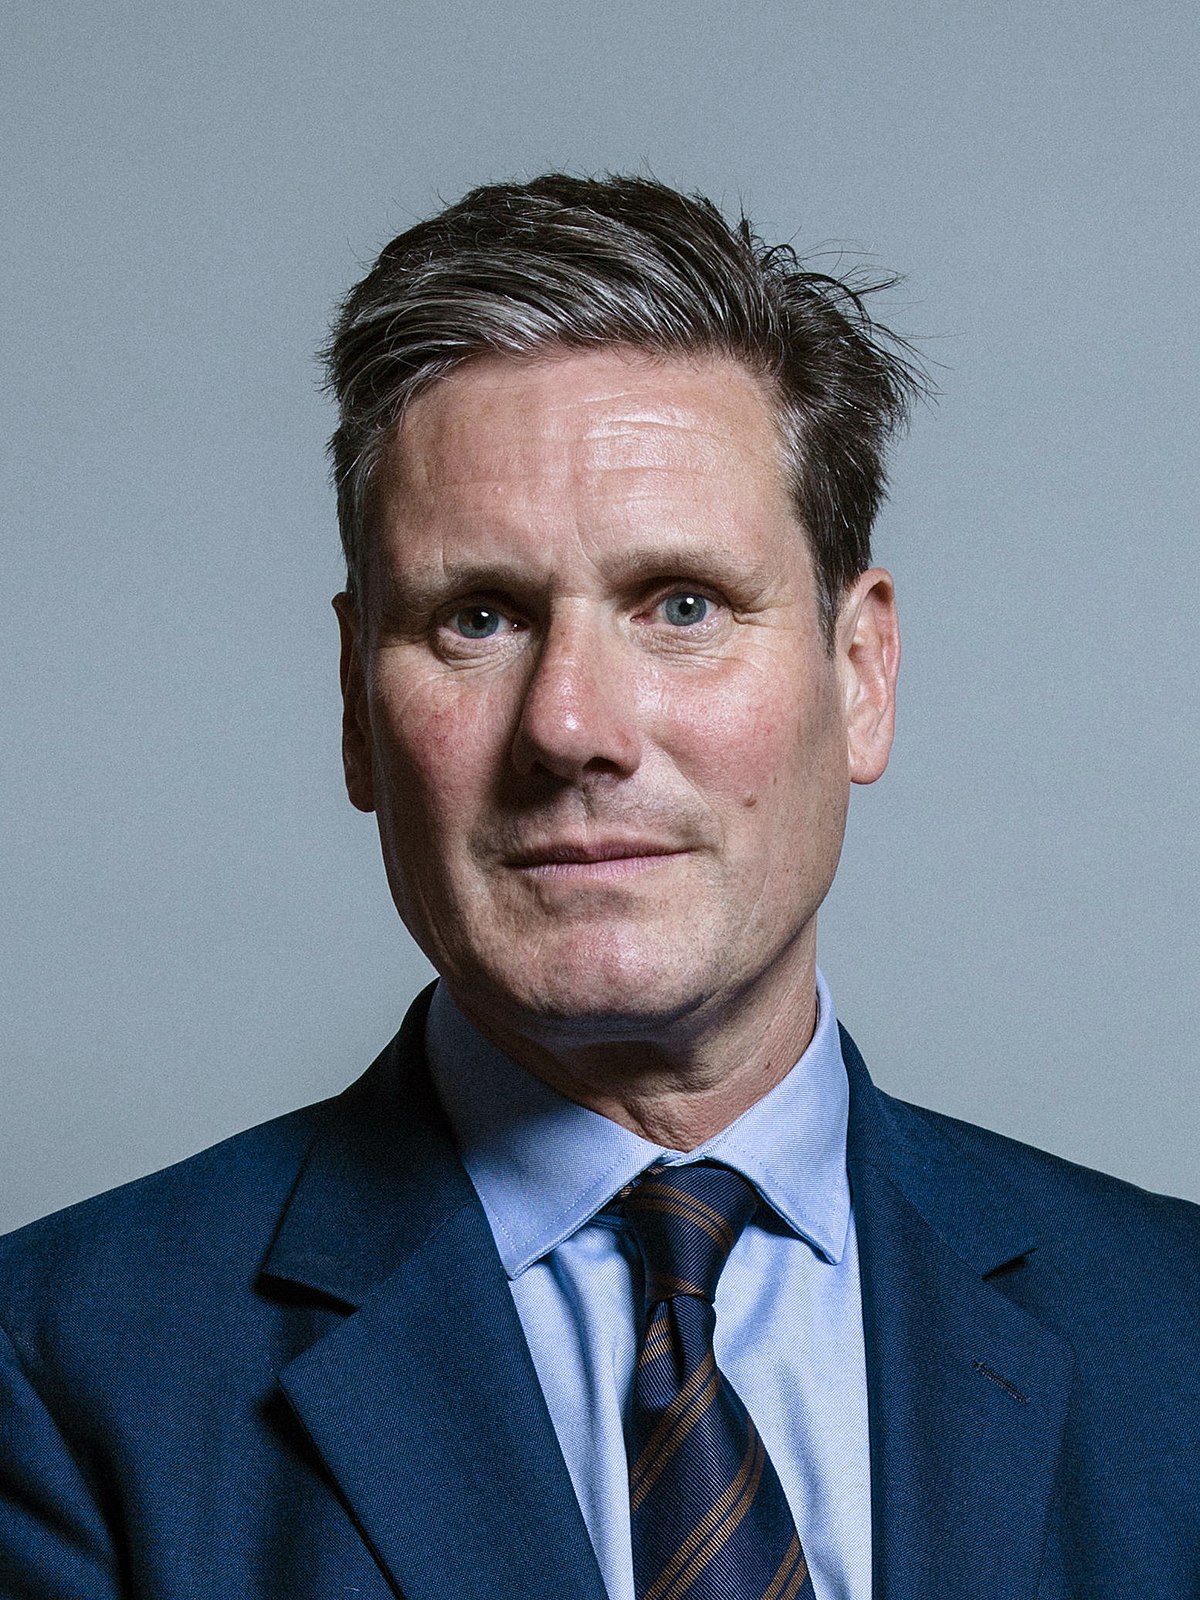 Rosie Duffield trans comments Keir Starmer Responds Saying not right and urges mature debate!